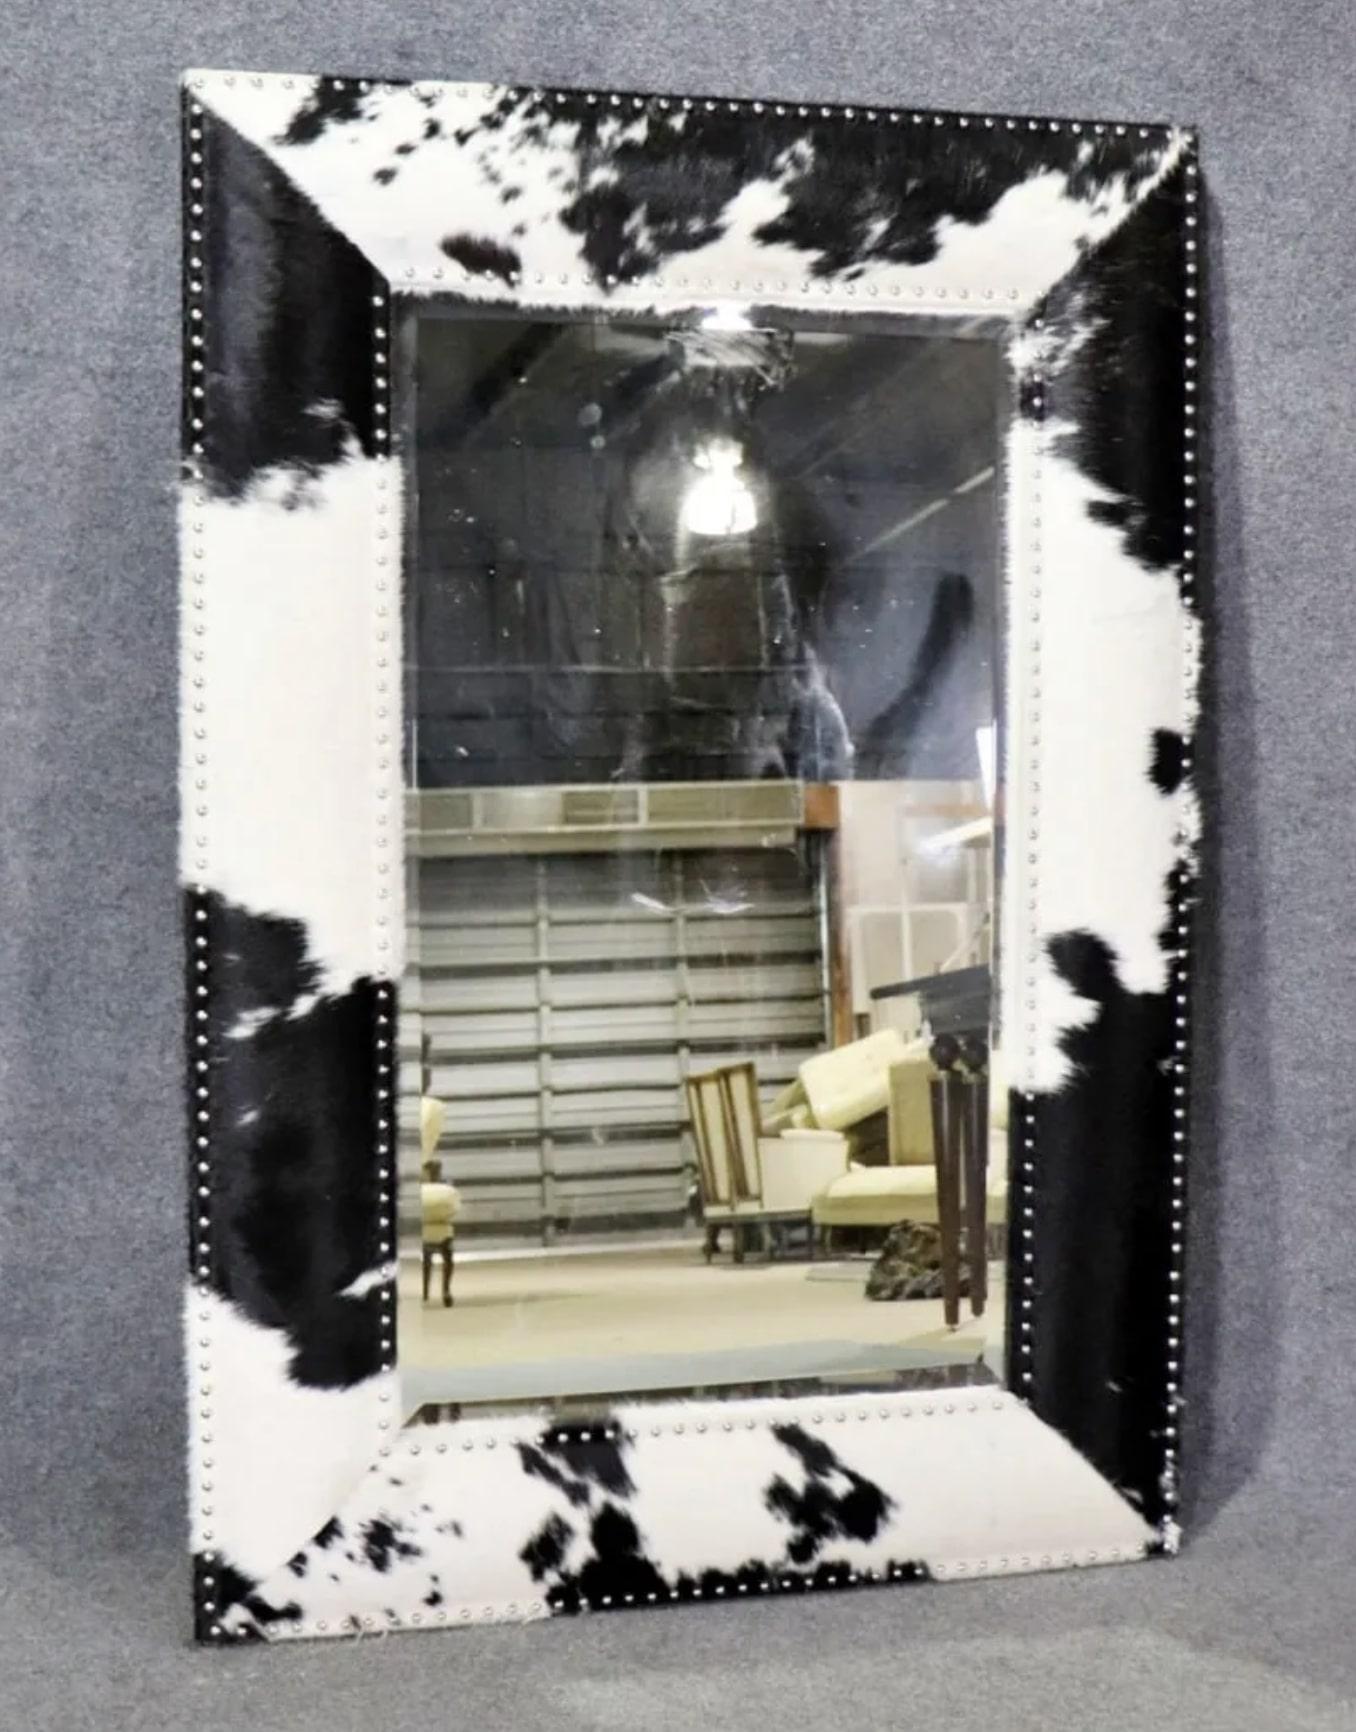 Black and white hide frame mirror with exposed nail trim. 
Please confirm location NY or NJ